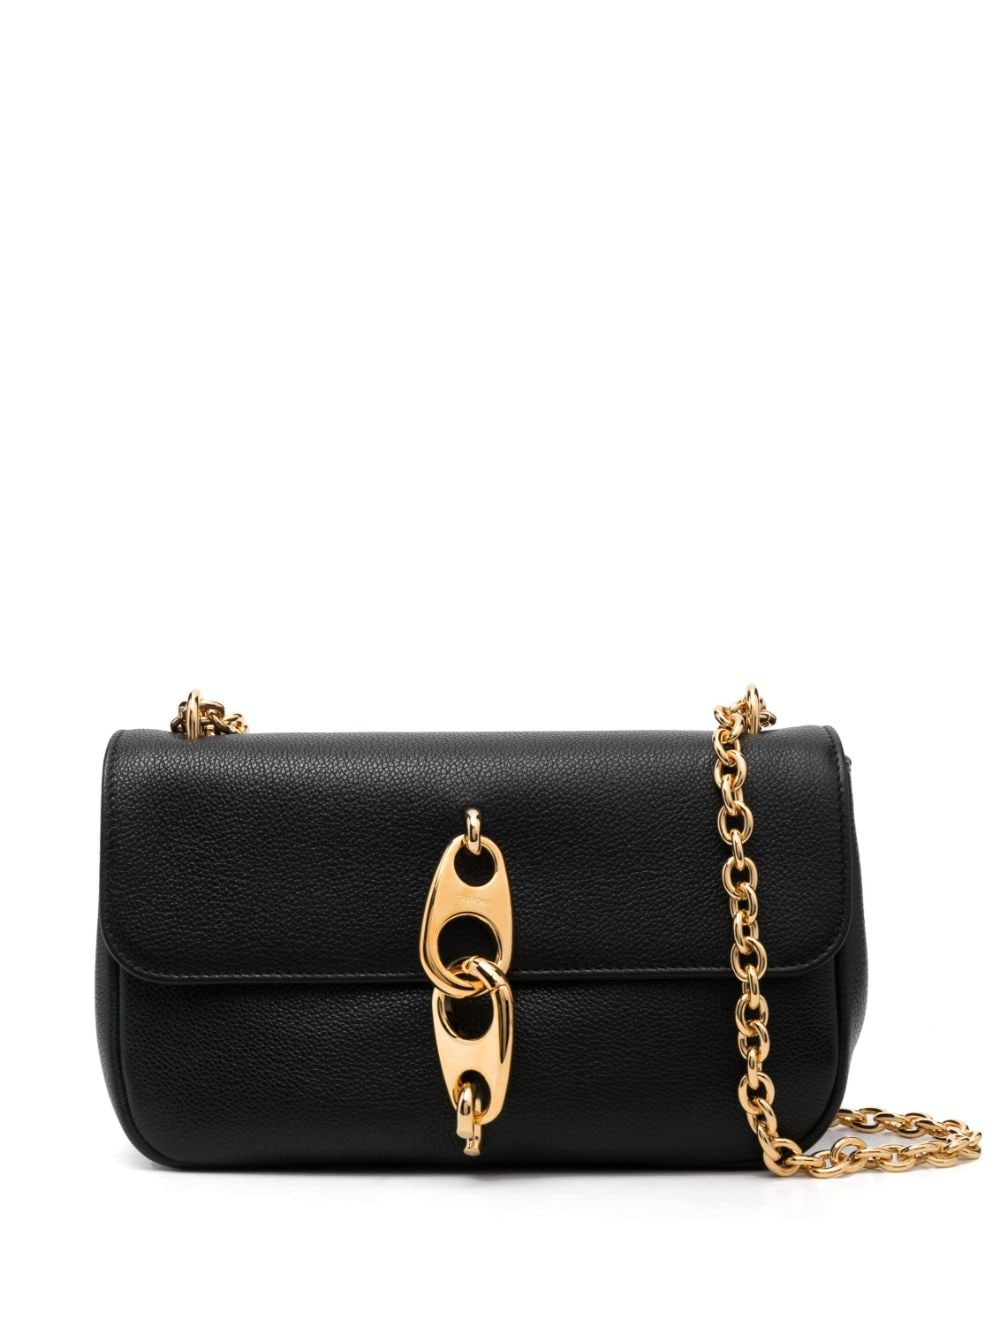 TOM FORD BLACK DAY CROSS BODY LEATHER BAG